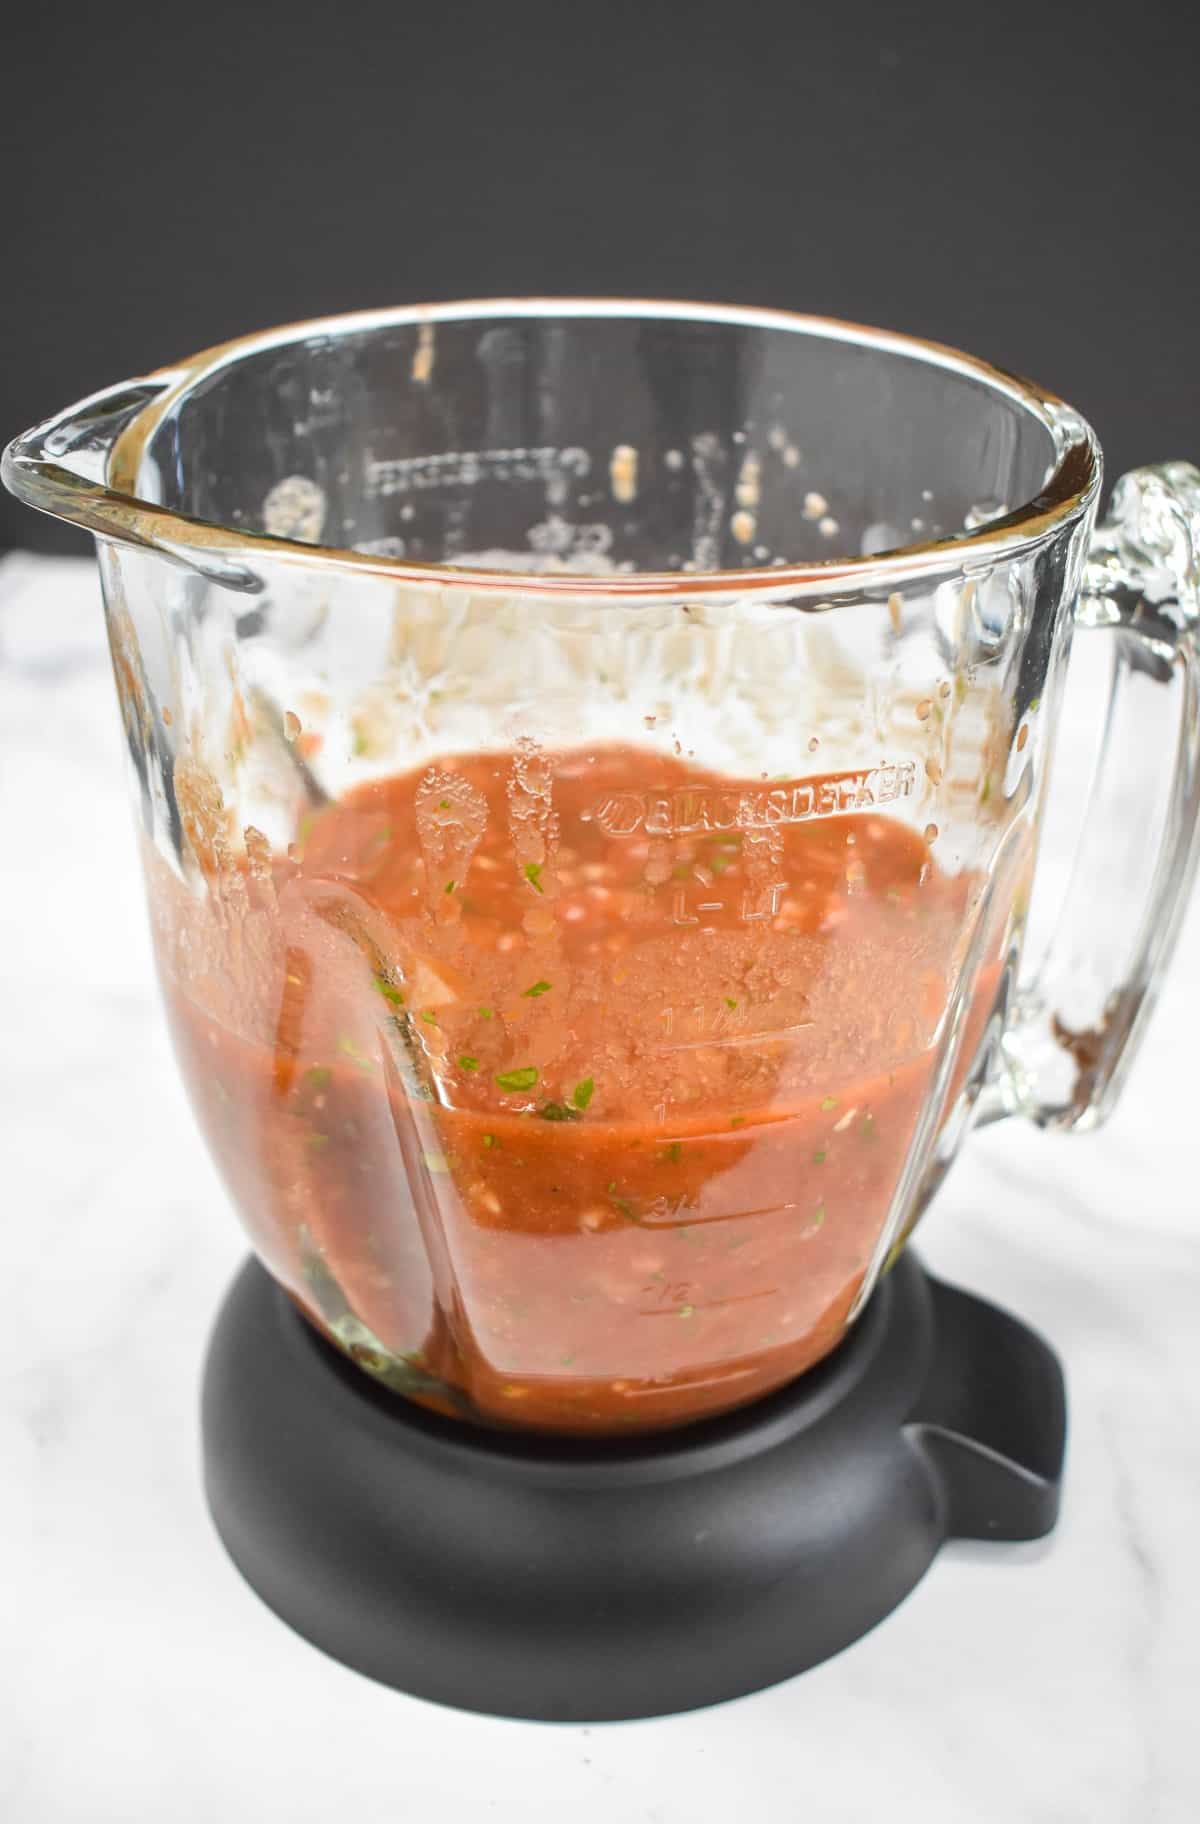 An image of the salsa still in the blender after being processed. The blender is set on a white table.